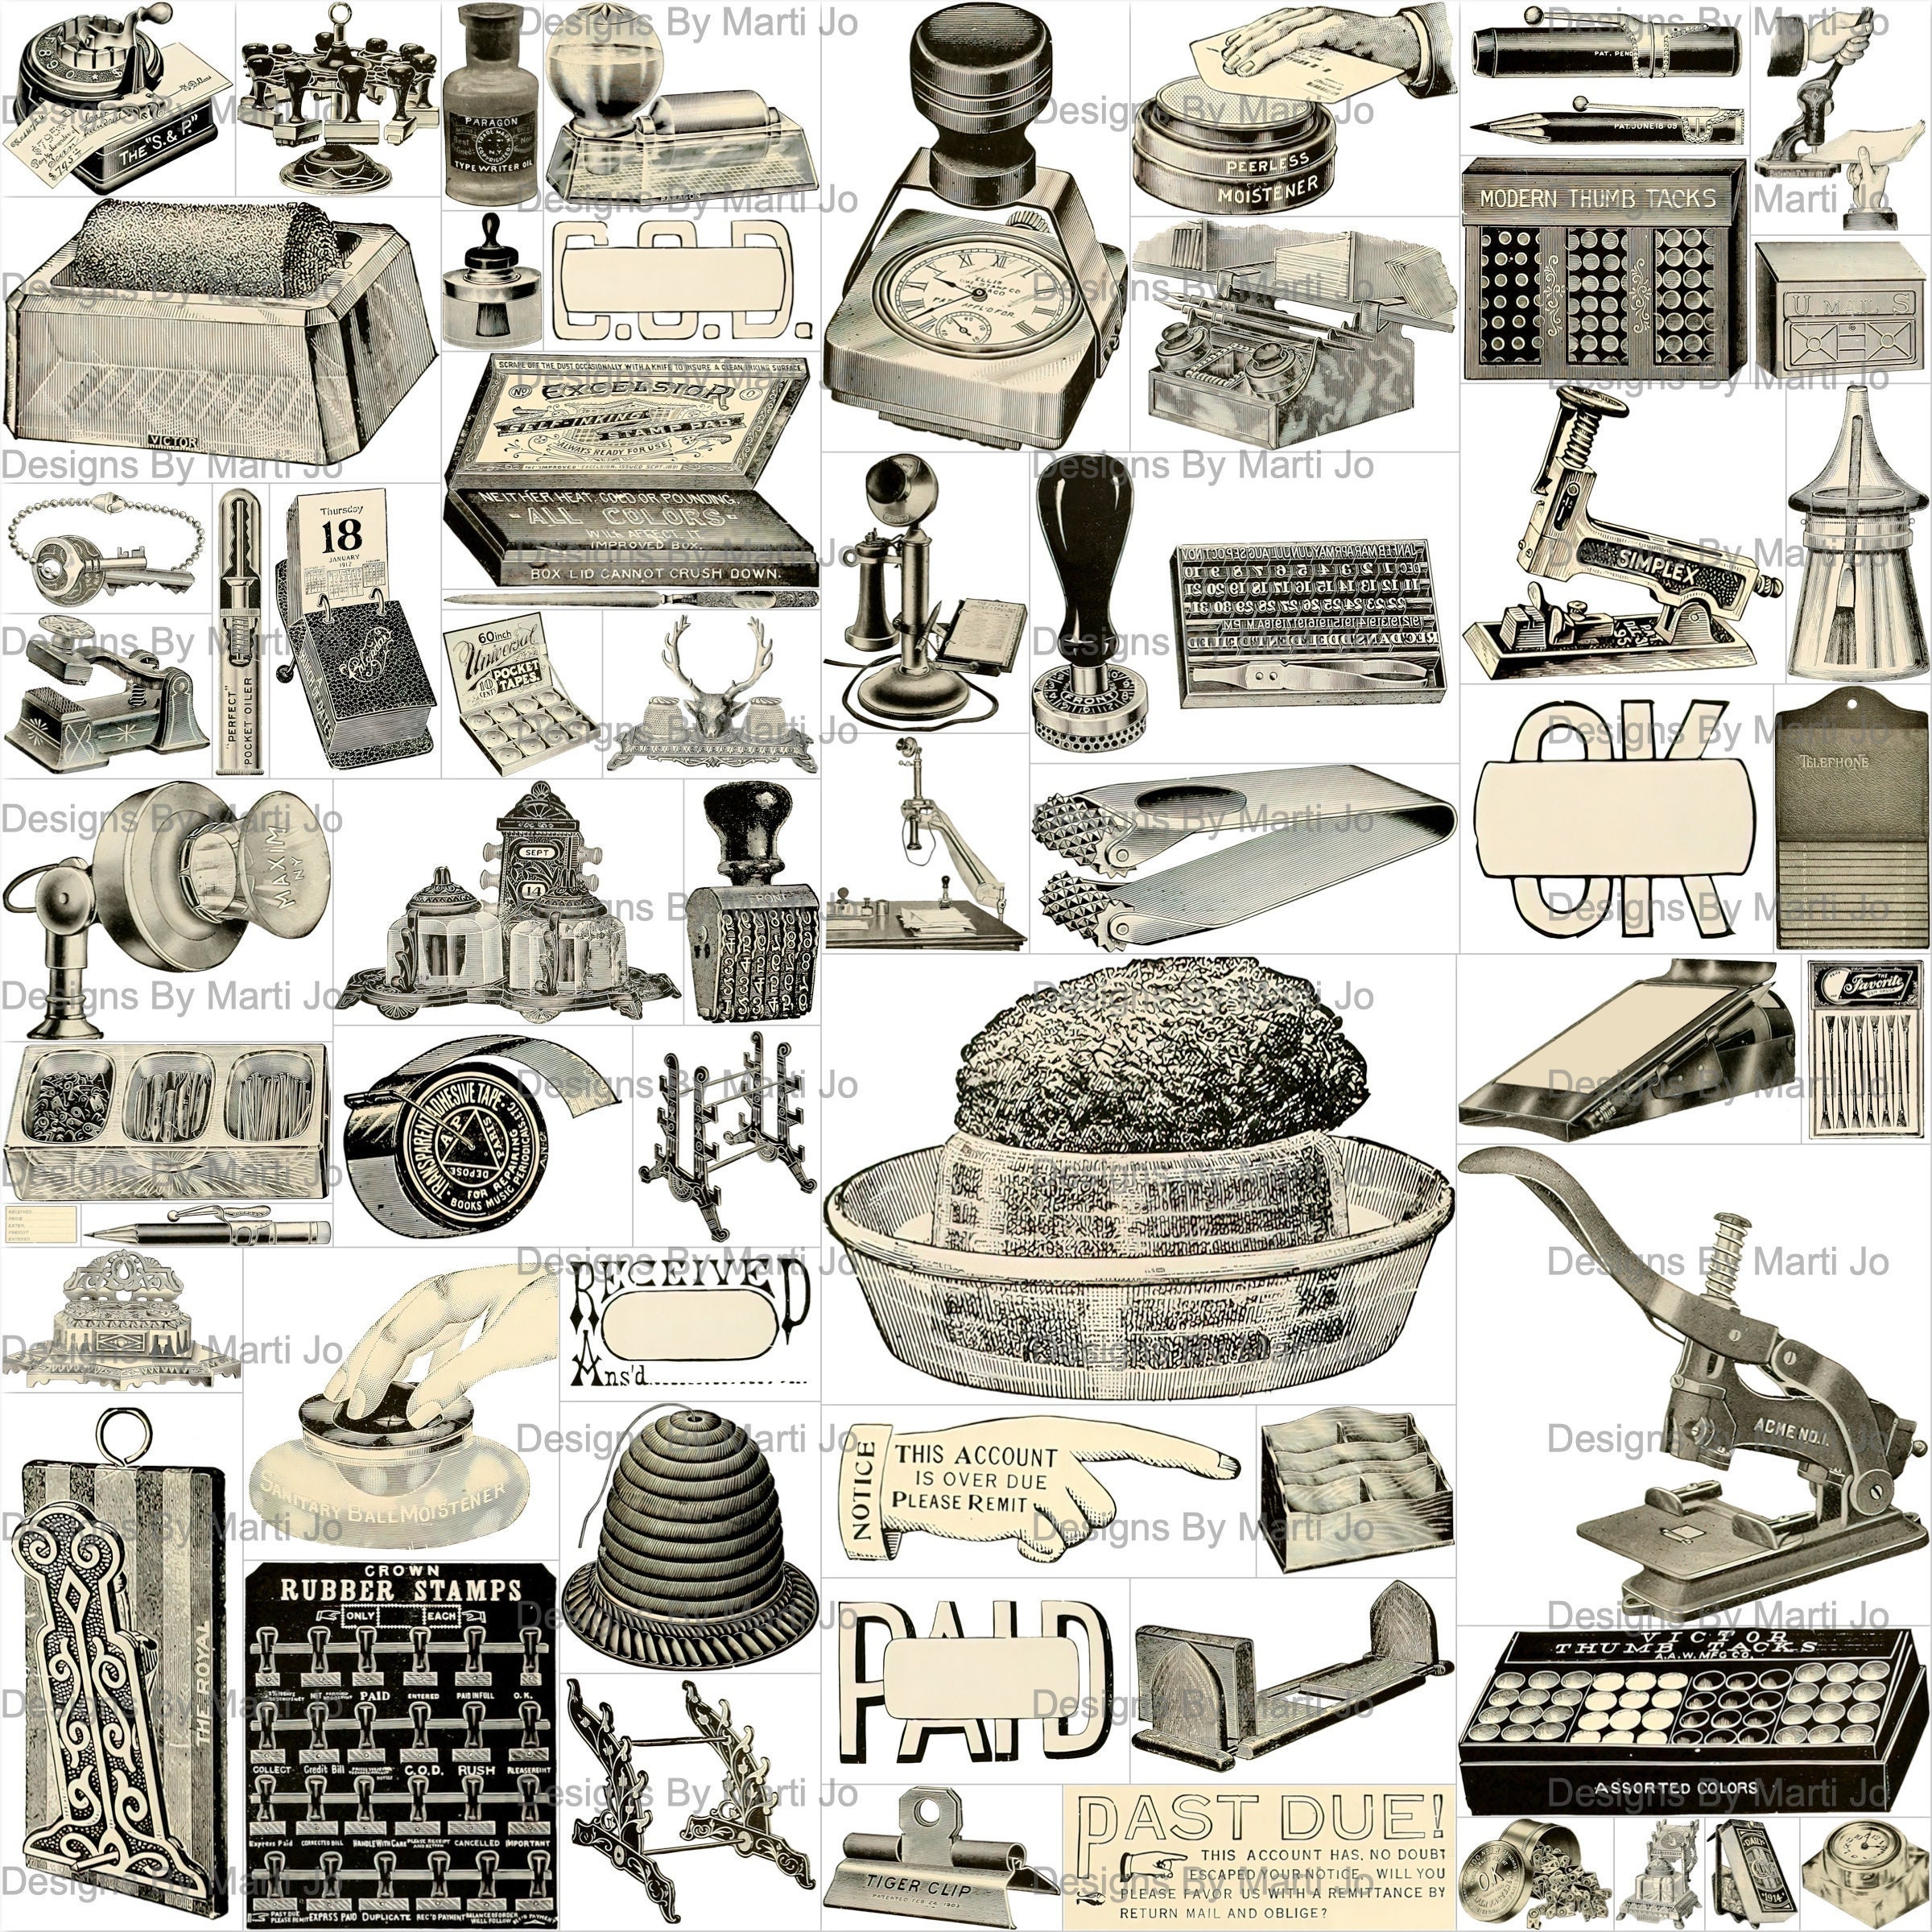 Vintage Office Supplies Elements Kit 1 60 Printable Vintage Business Items  BONUS: Two 8.5 X 11 Jpgs of All Images 5x6 VC65 (Download Now) 